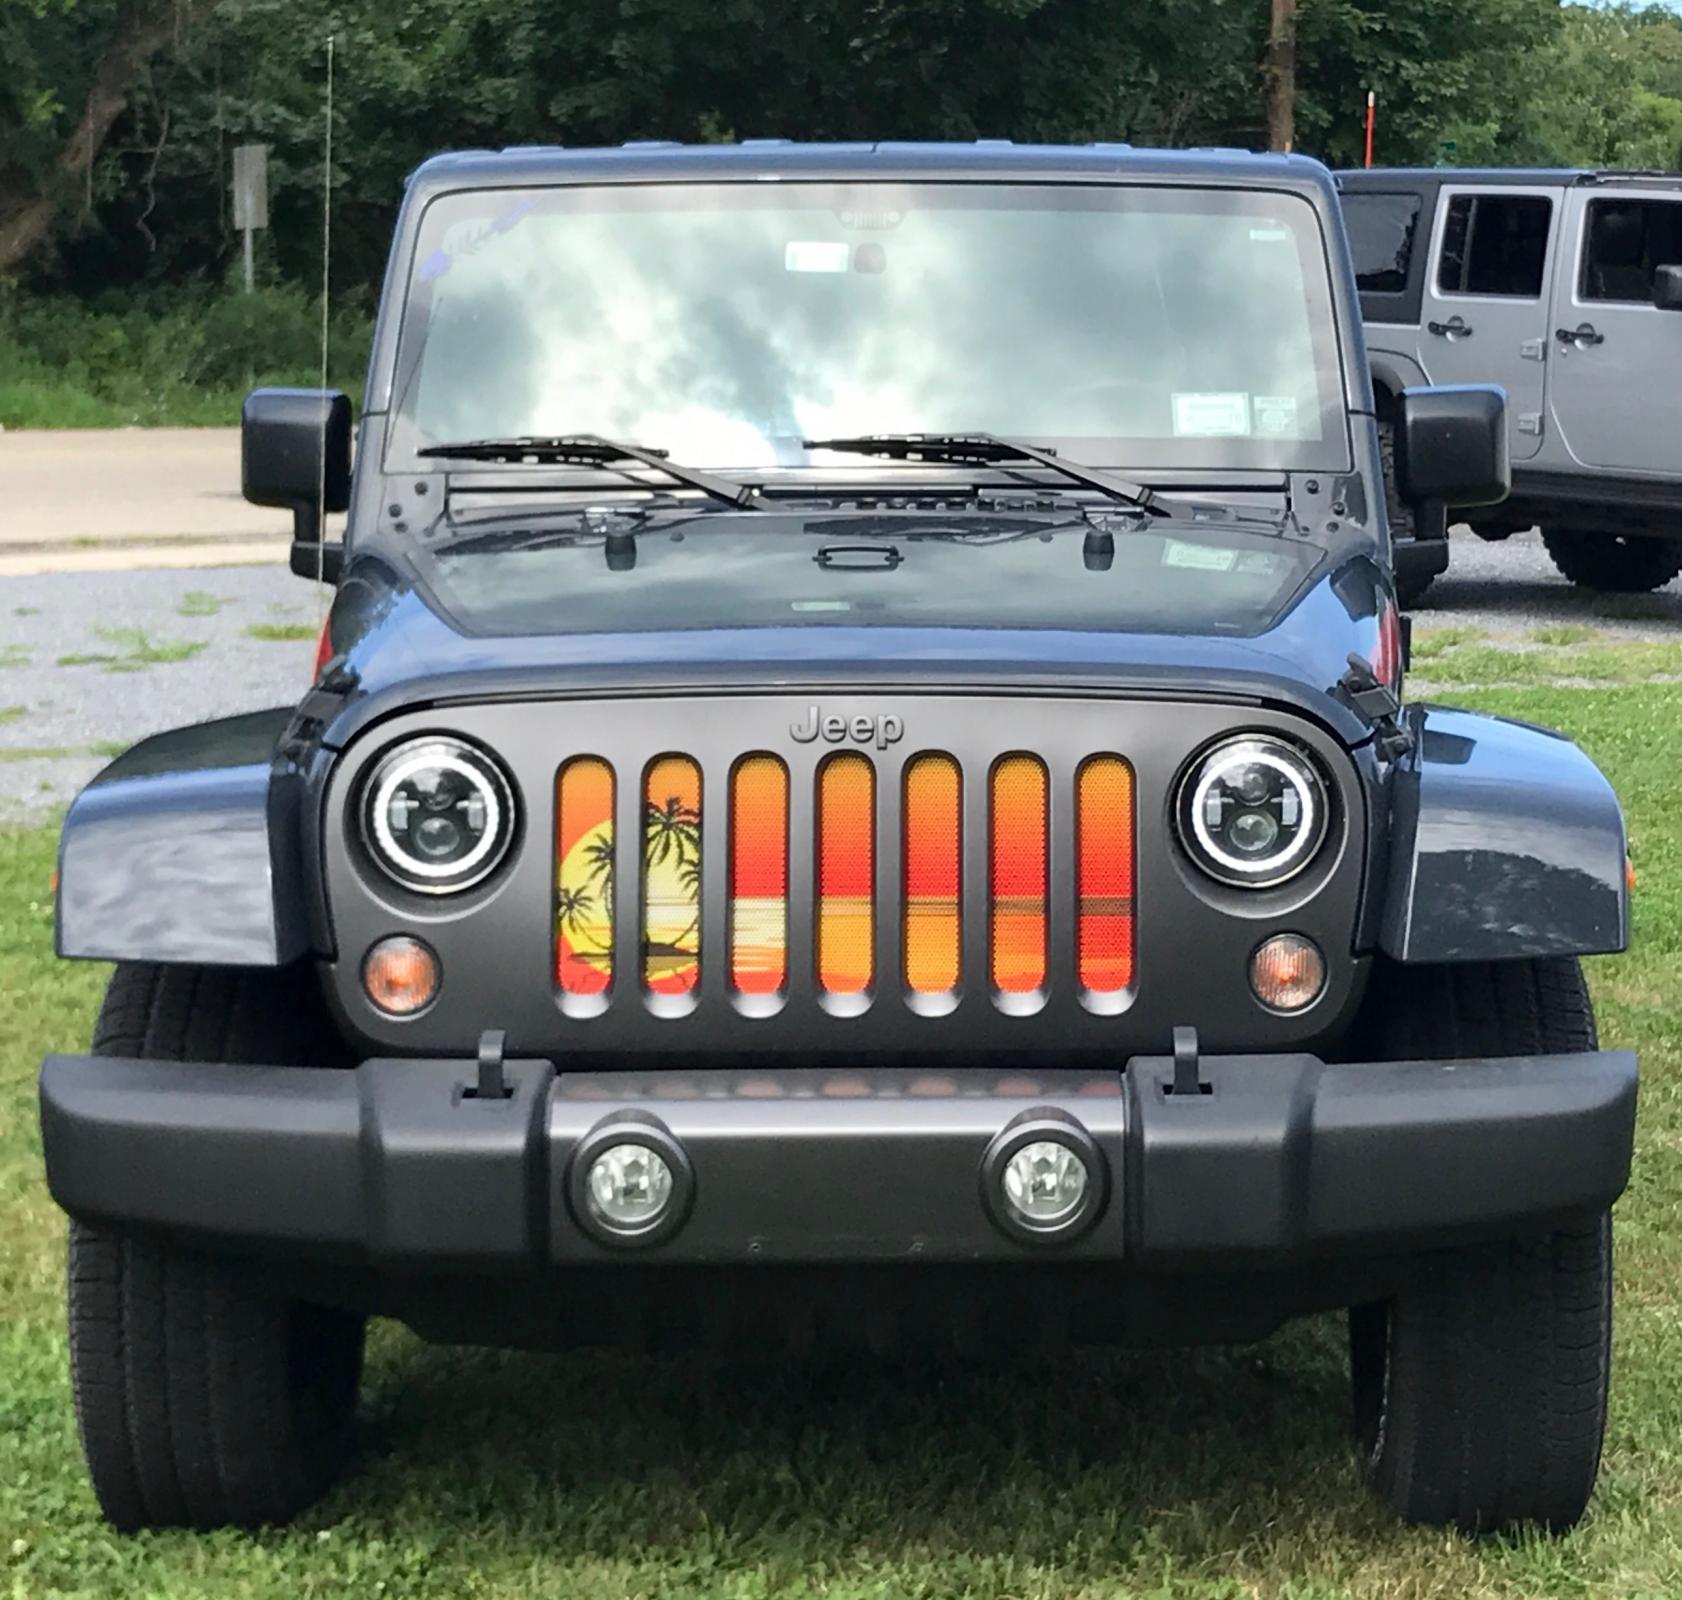 Jeep Grill Flag Yellow, Car Flags and Accessories